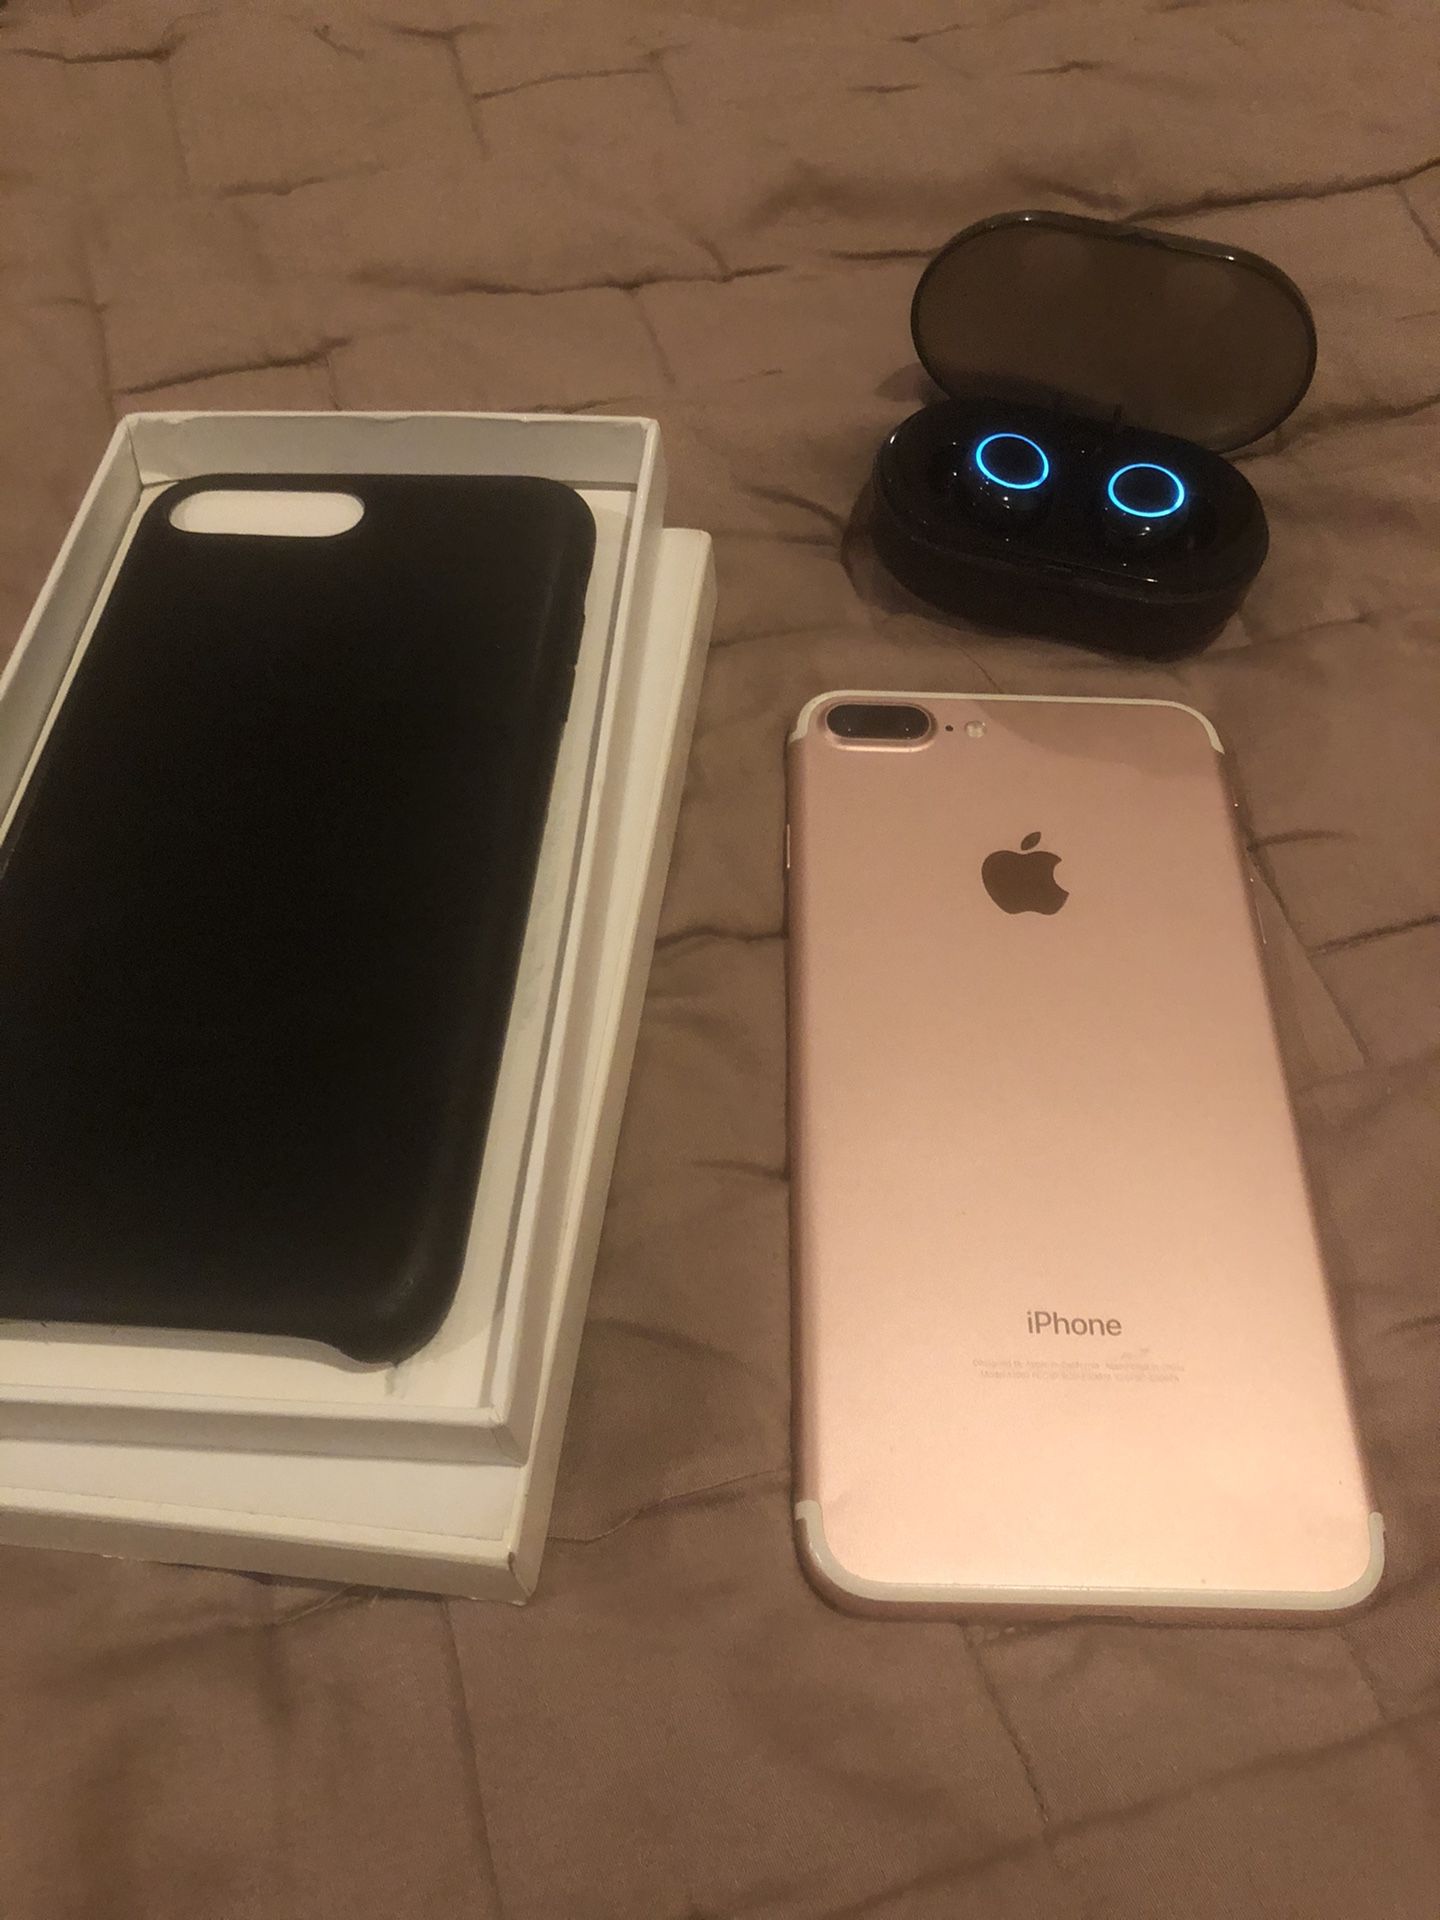 WOW CRACKED VZW iPhone 7 PLUS 128gb witH EXTRAS